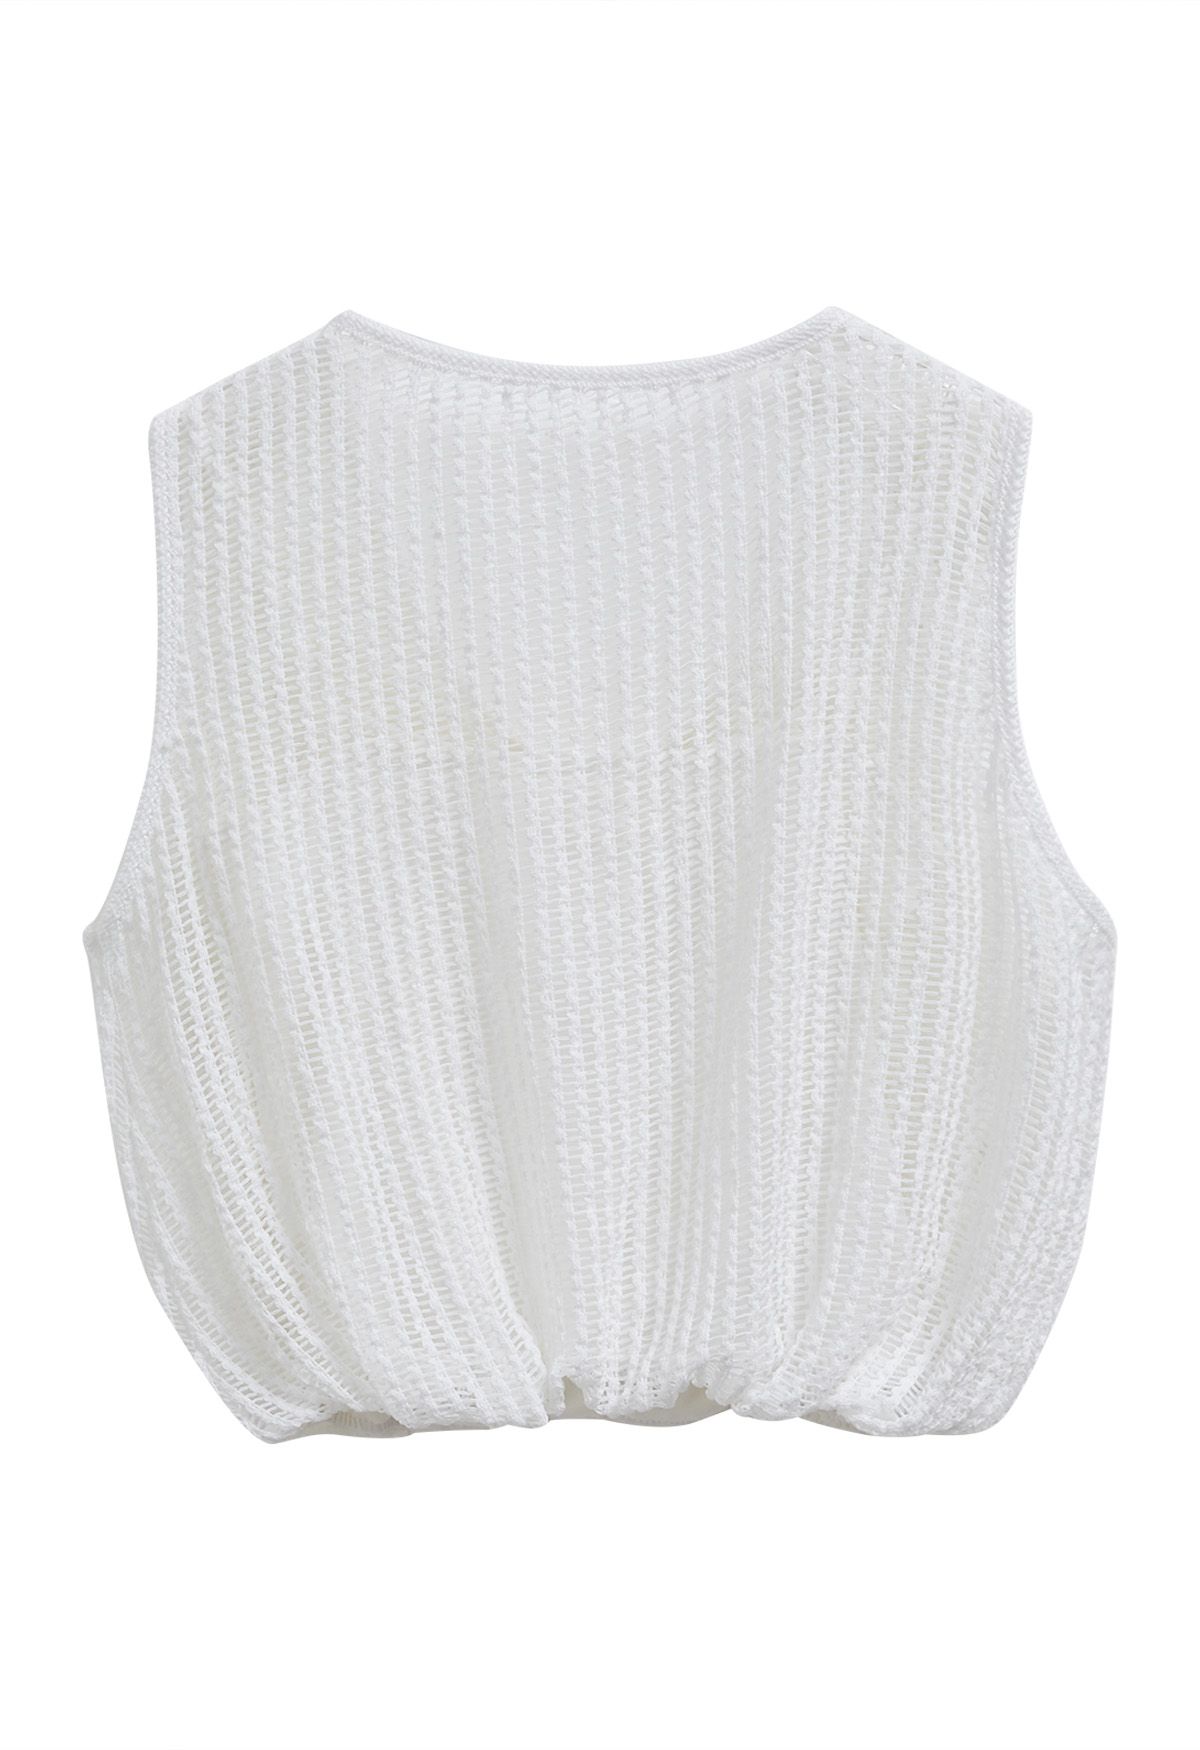 Hollow Out Sleeveless Crop Top in White